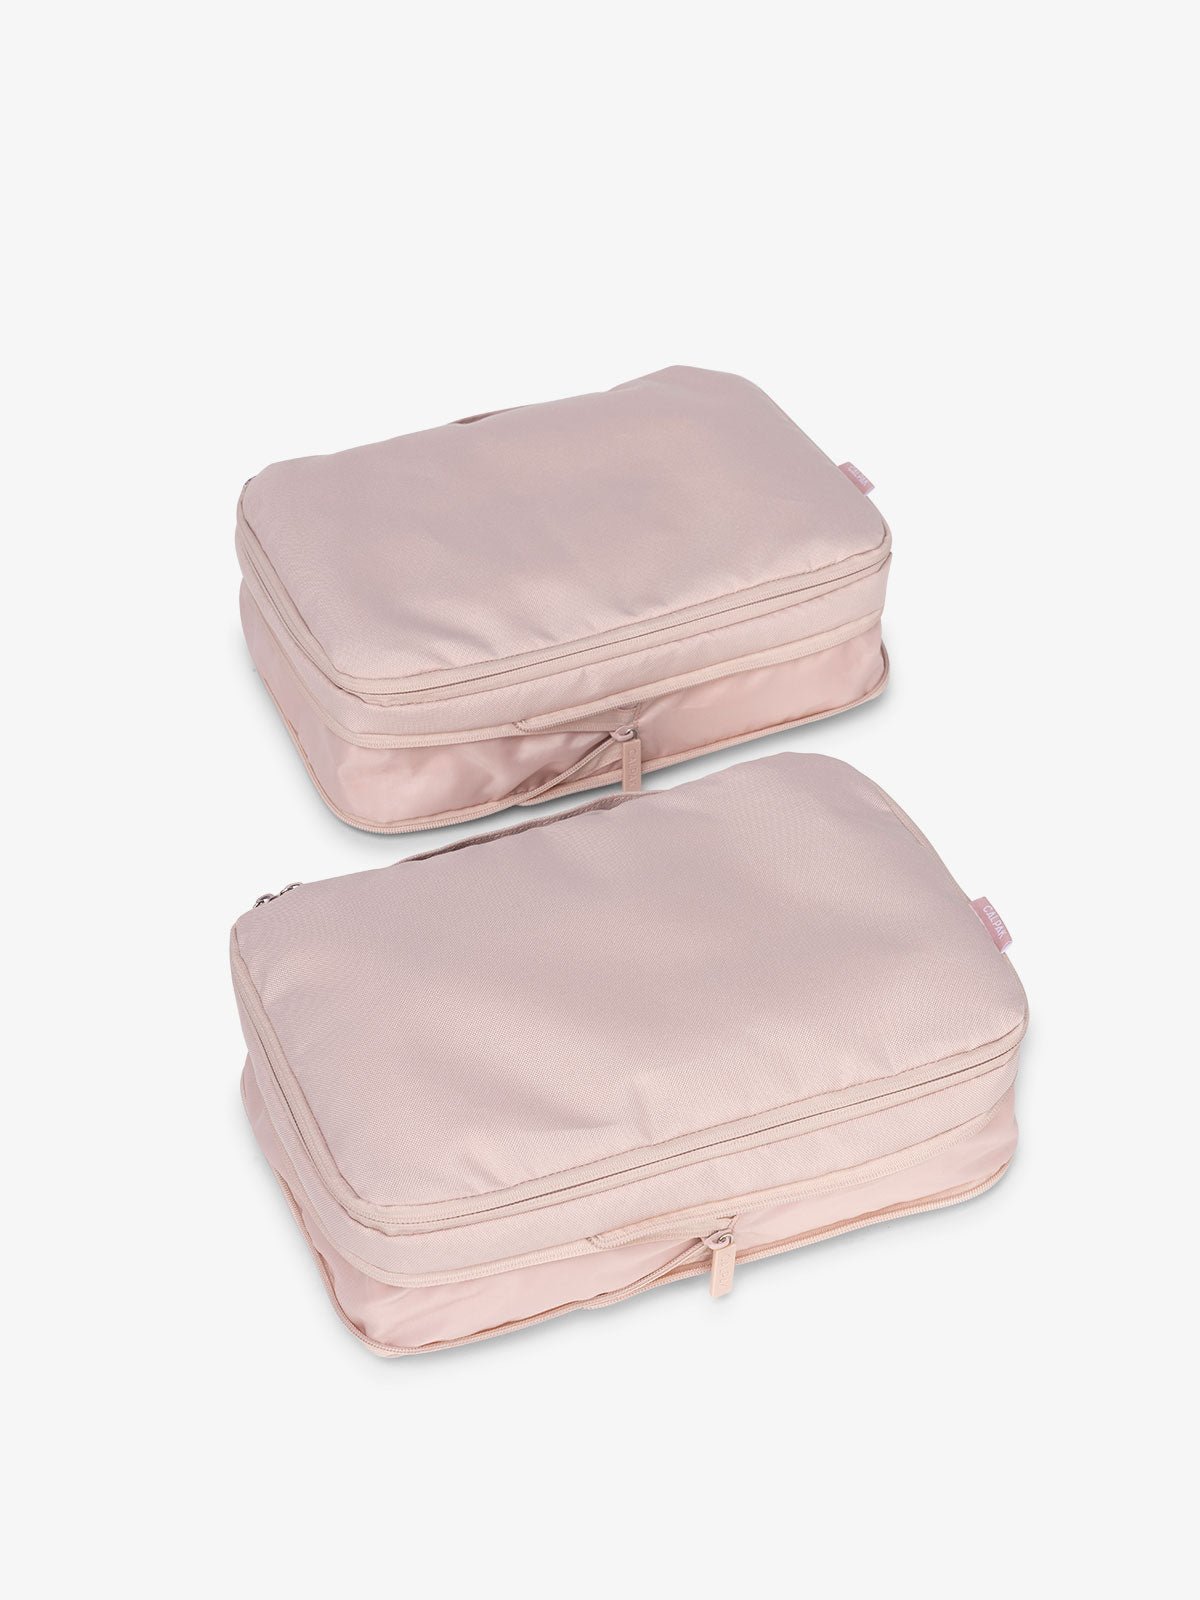 travel packing compression cubes